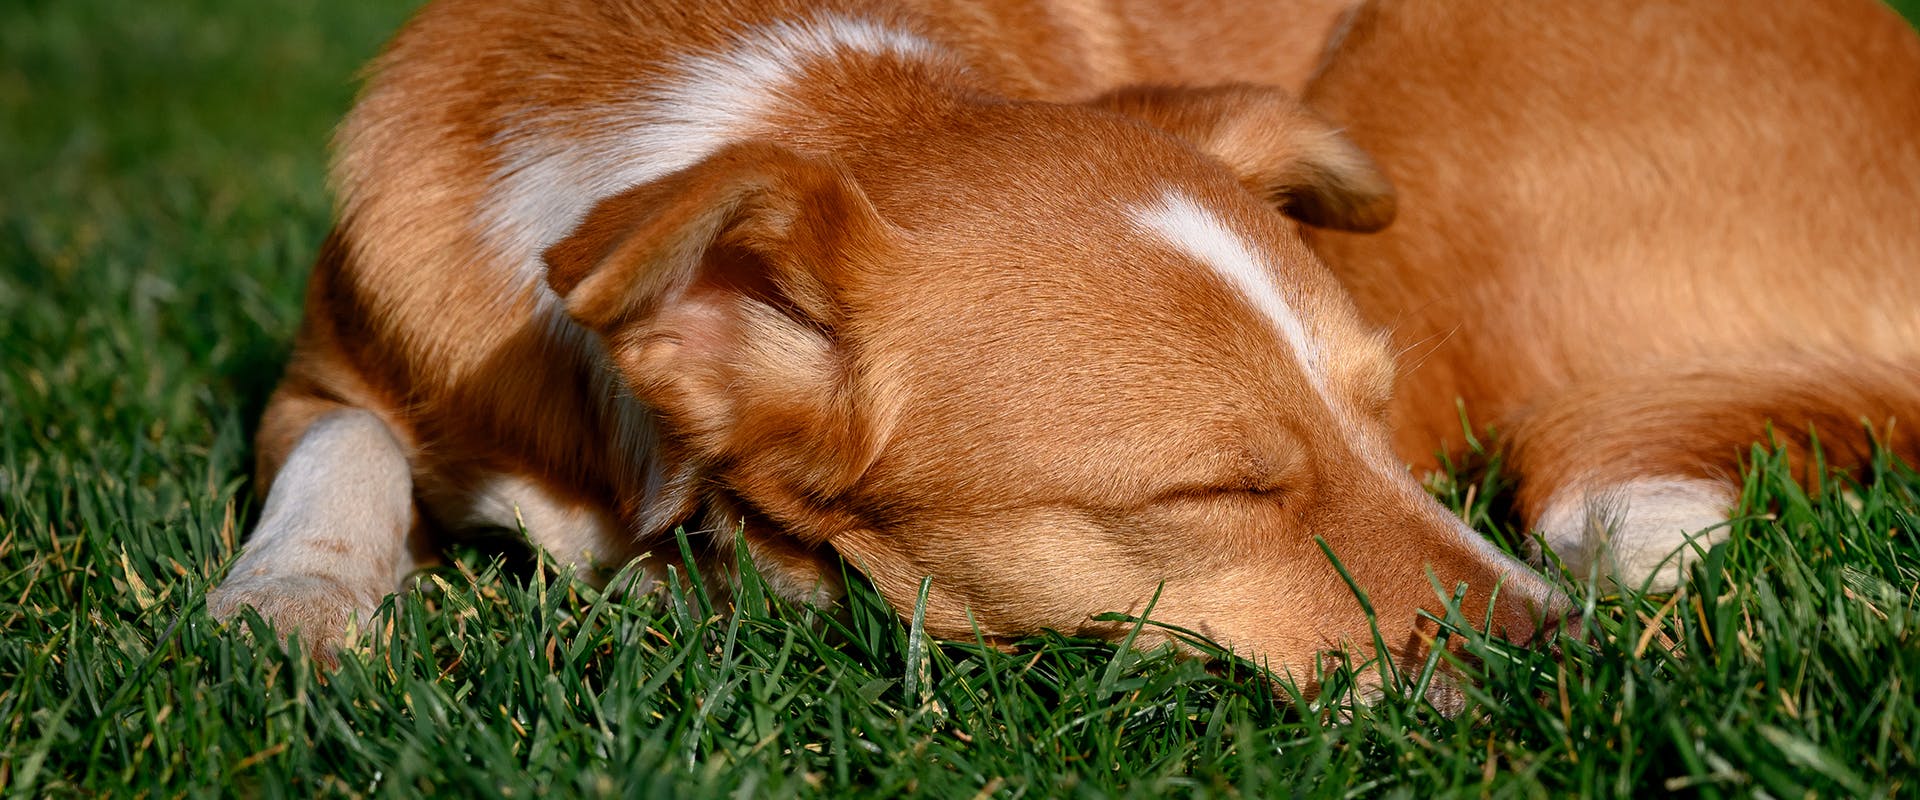 A red dog sleeping peacefully in the grass